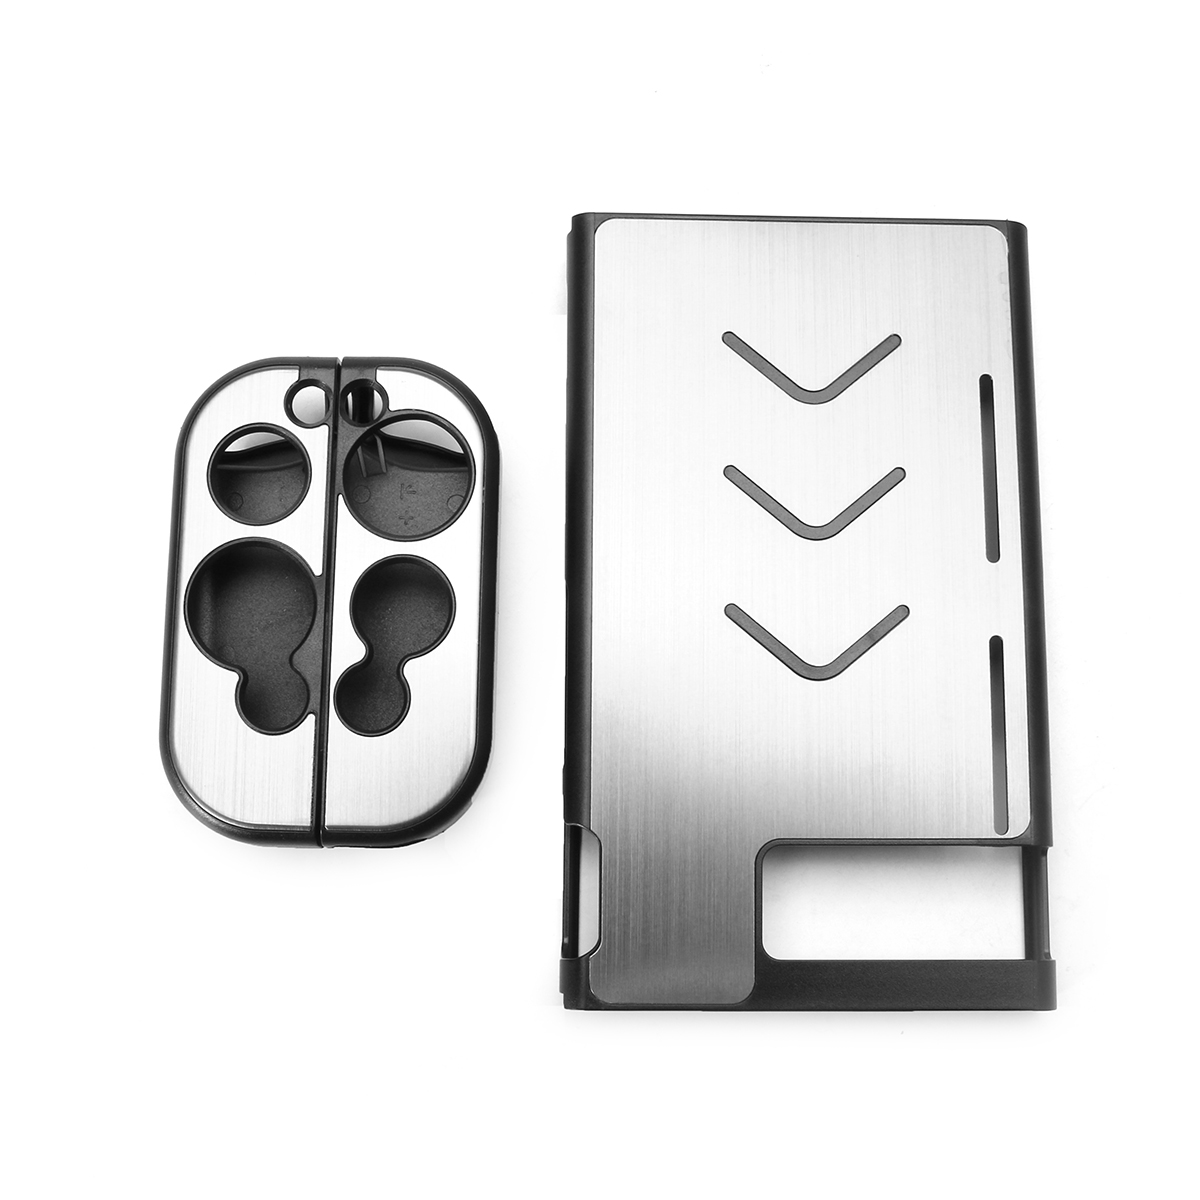 Replacement Accessories Housing Shell Case Protective For Nintendo Switch Controller Joy-con 4